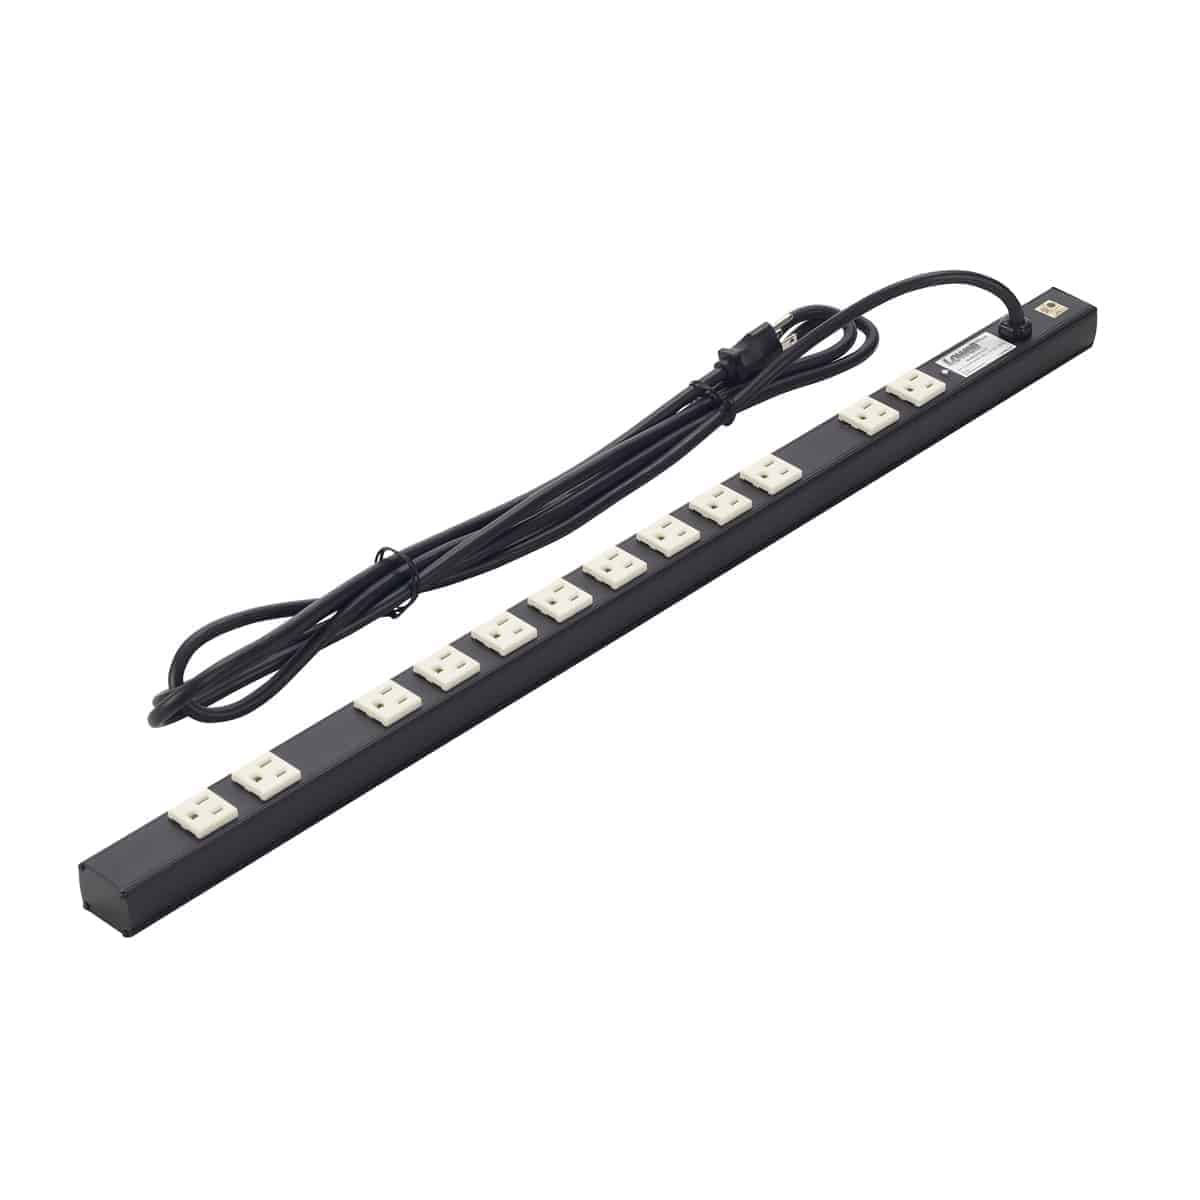 Lowell ACS-1512 Power Strip-15A 12 Outlets 6' cord